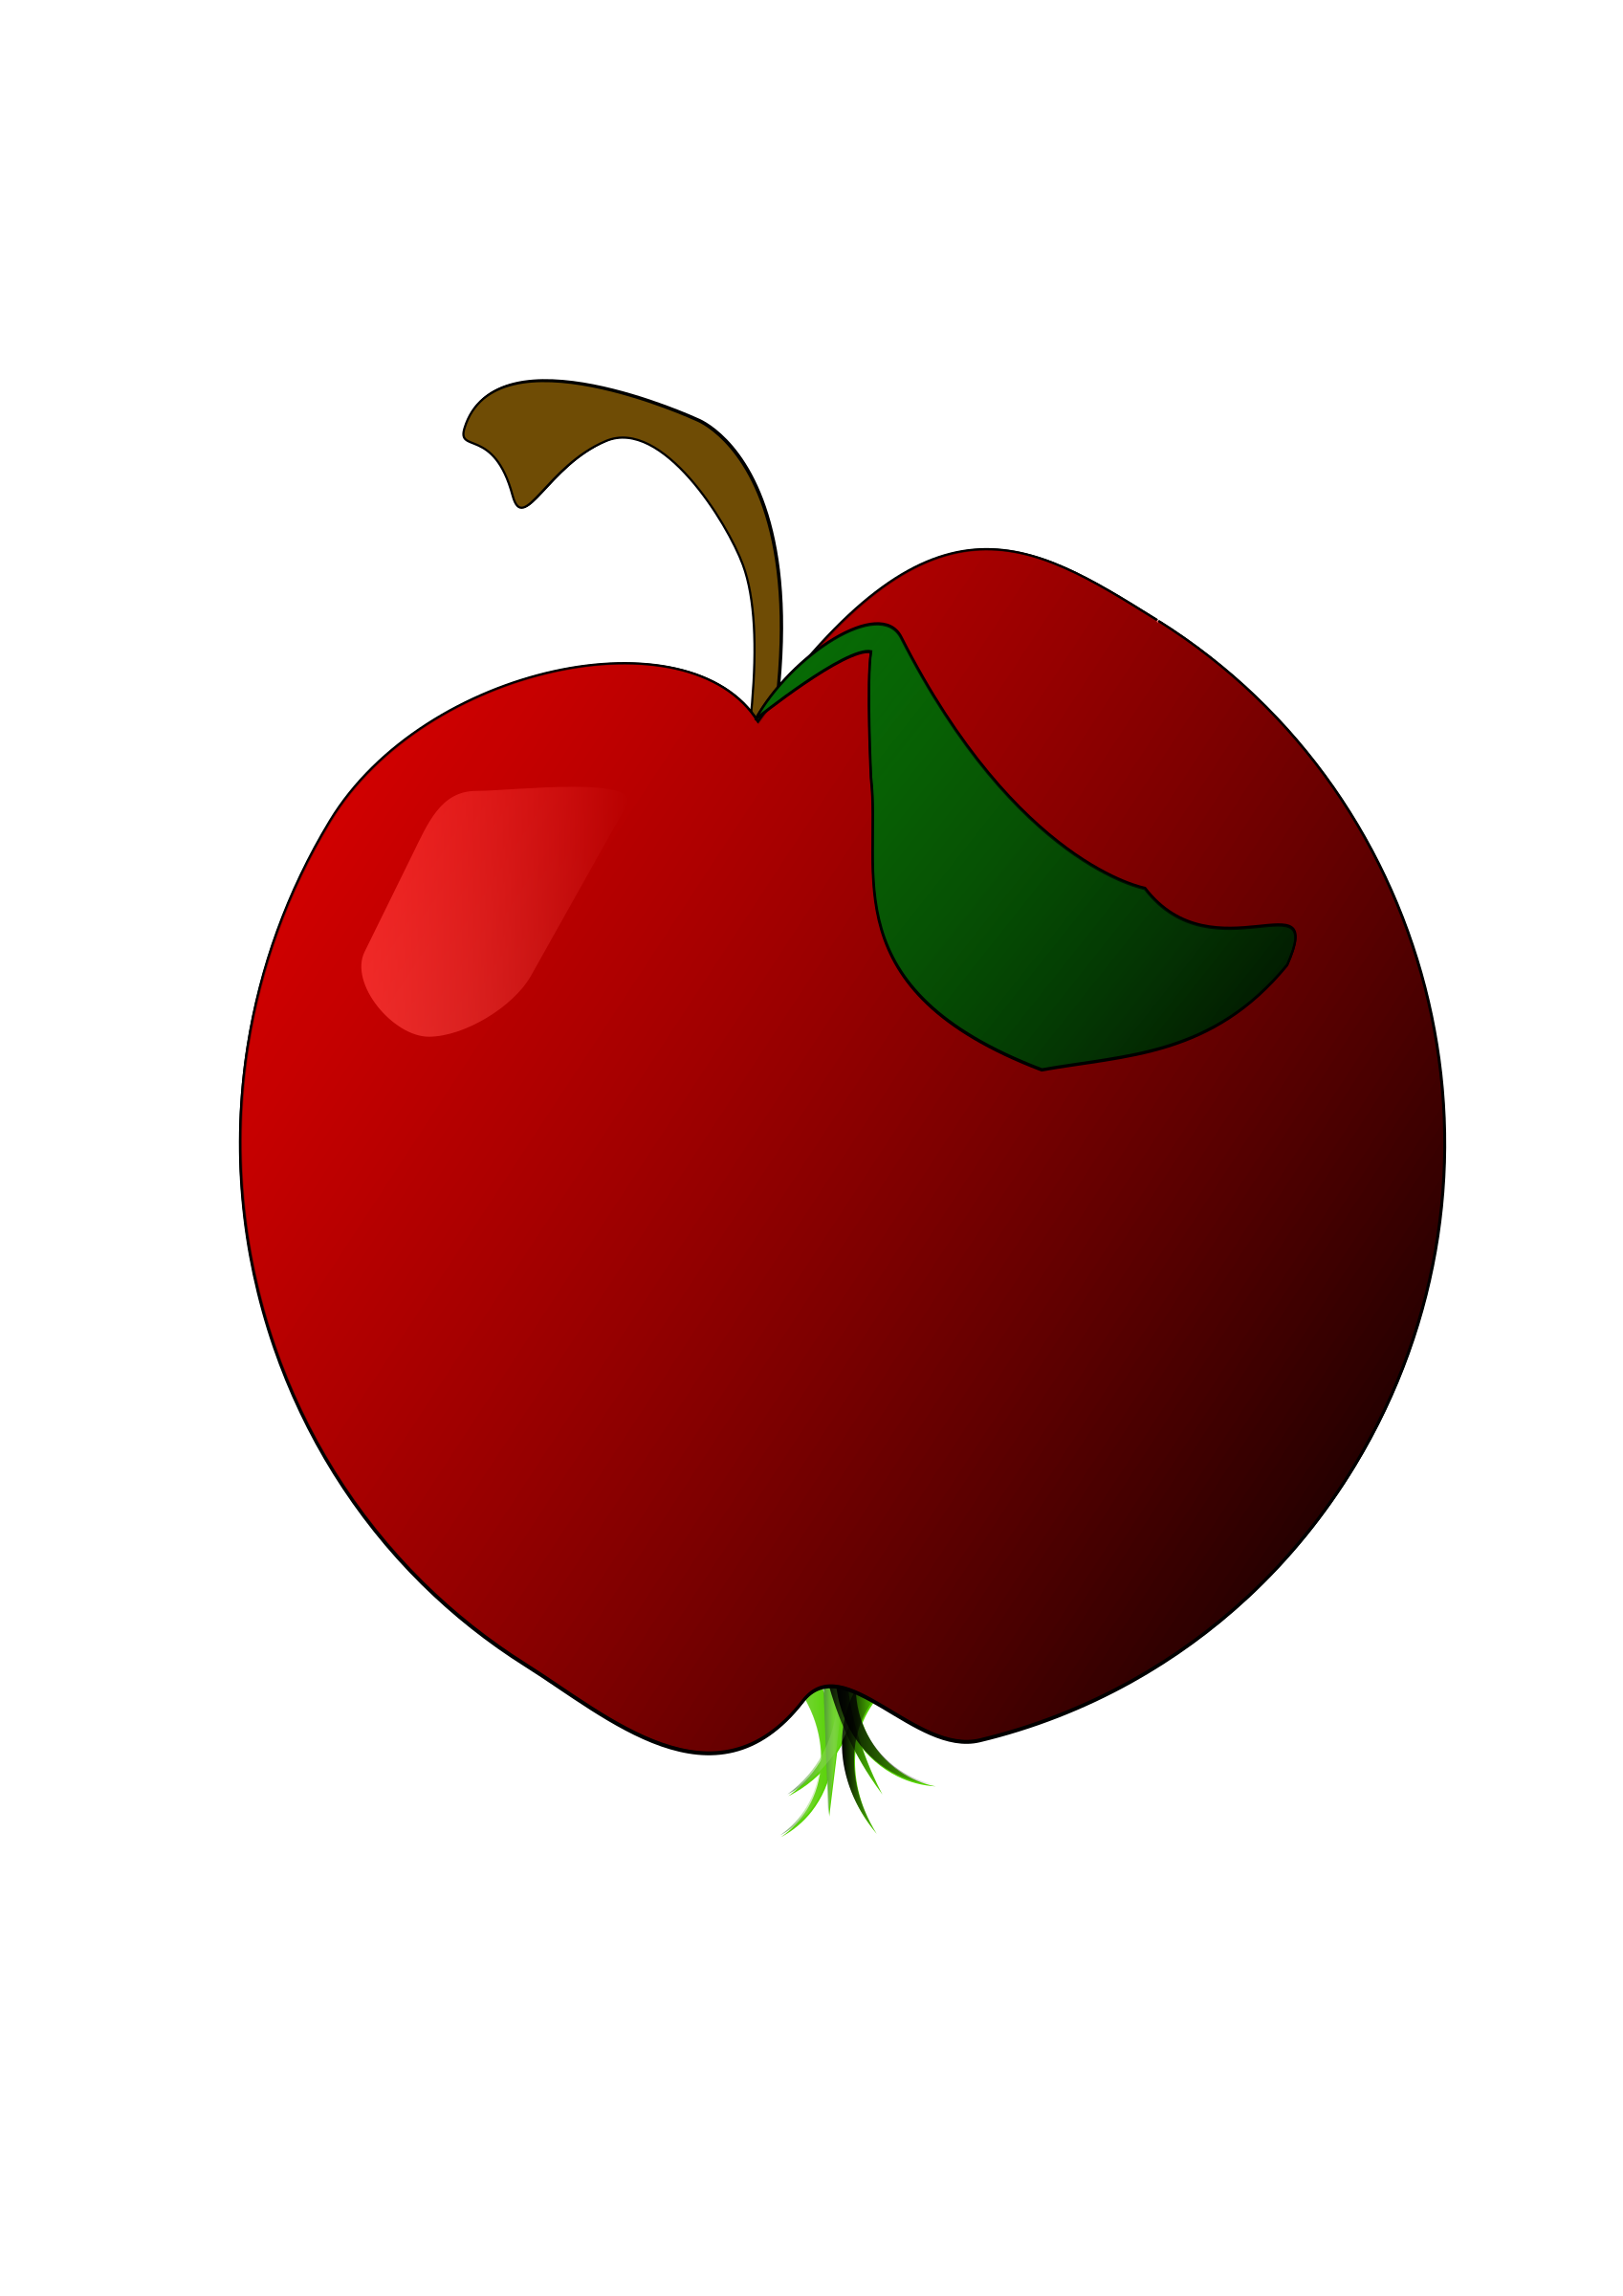 red apple clipart - photo #37